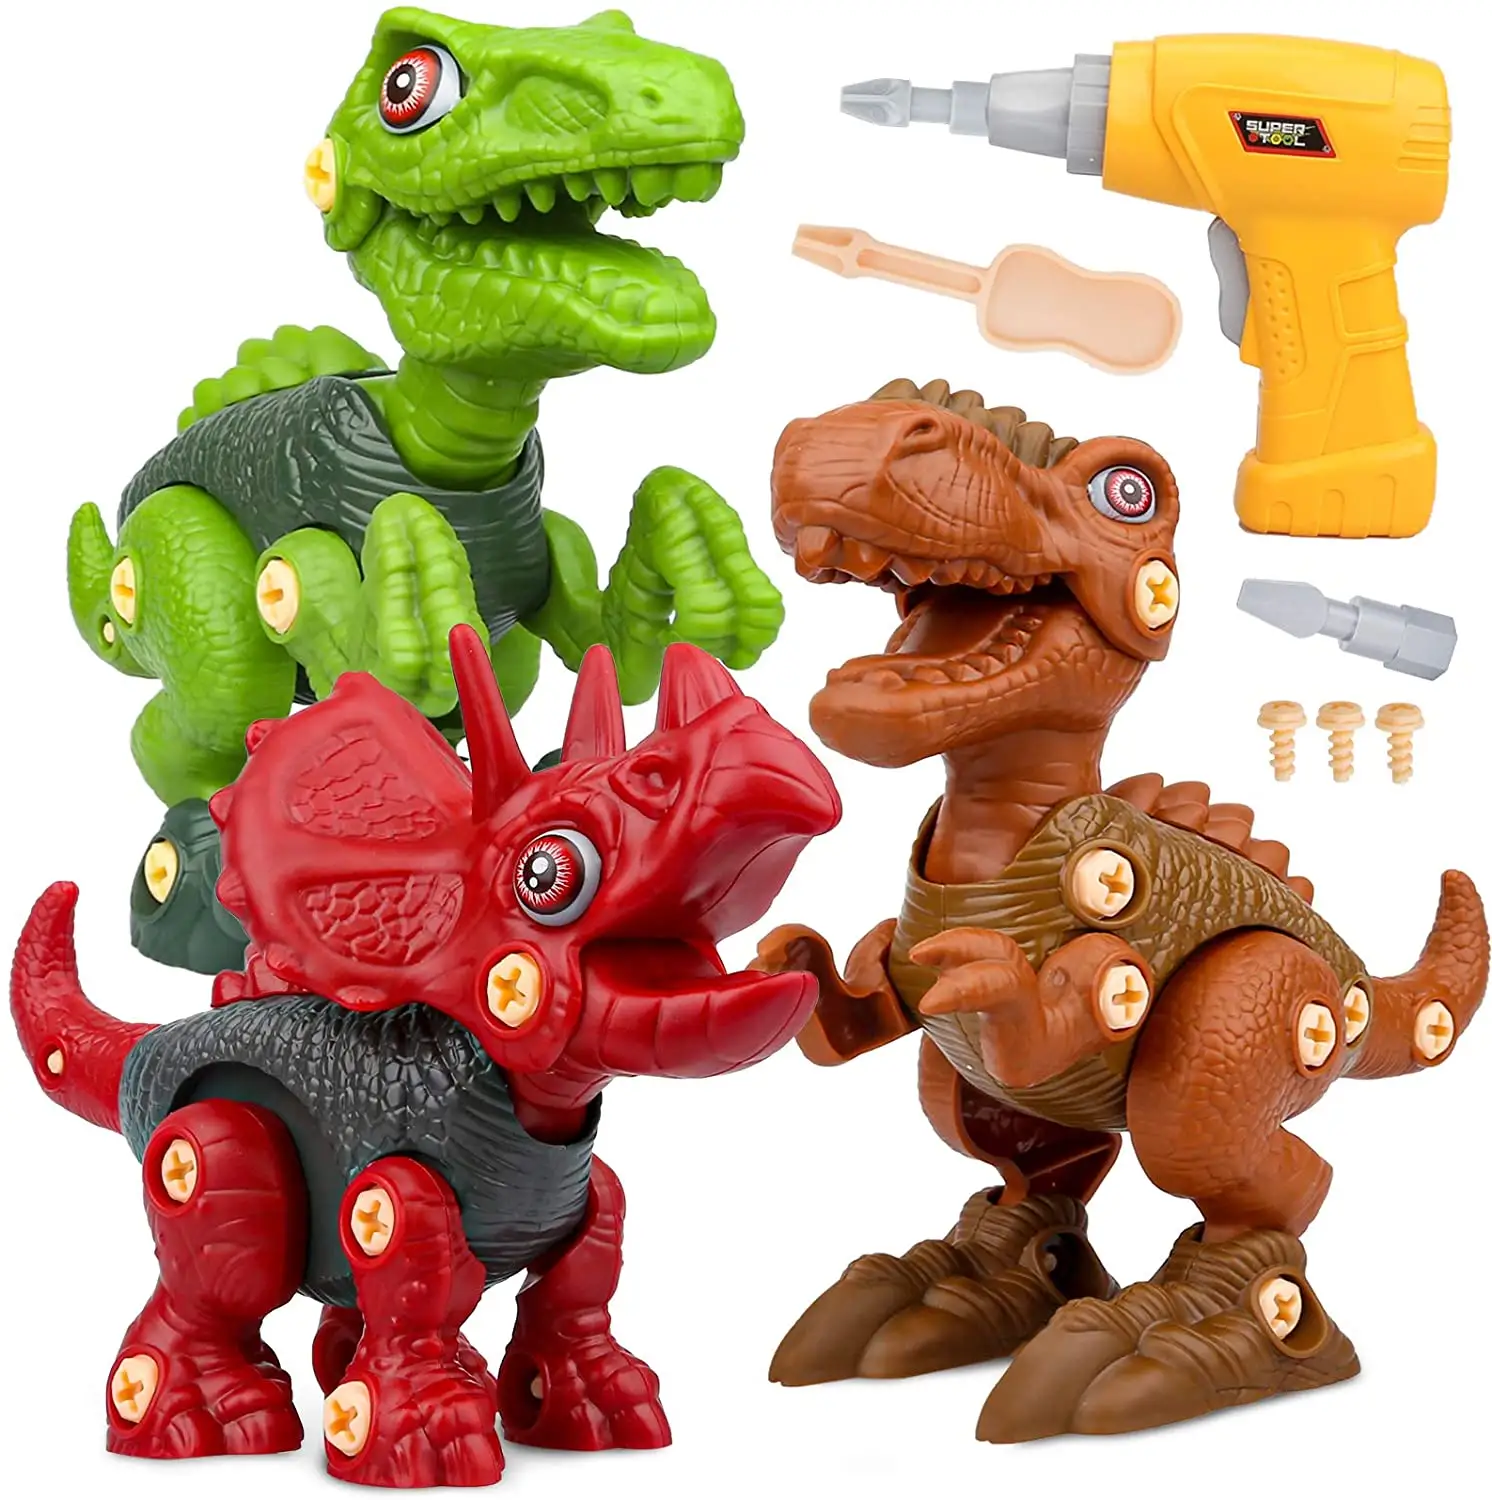 Amazon Hot Sale Assembly Dinosaur Play Set ,DIY Take Apart Dinosaur Toy for Kids,Kids Learning Animal Toys with Electric Drill